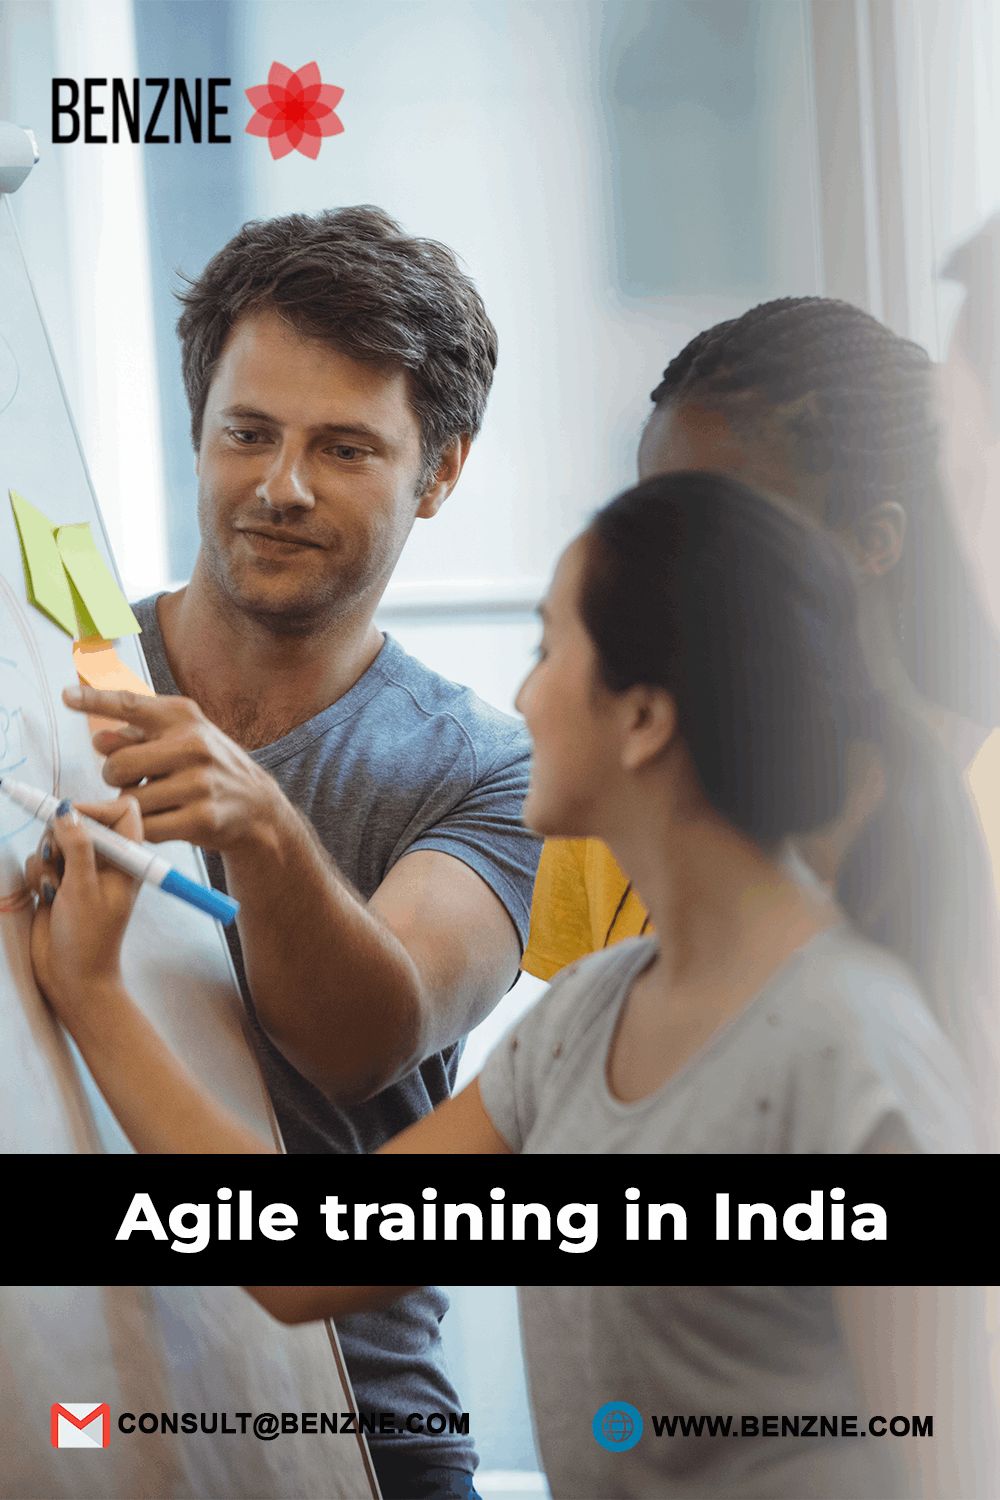 Agile Training in India with Benzne: The Best Approach to Being an Agile Expert